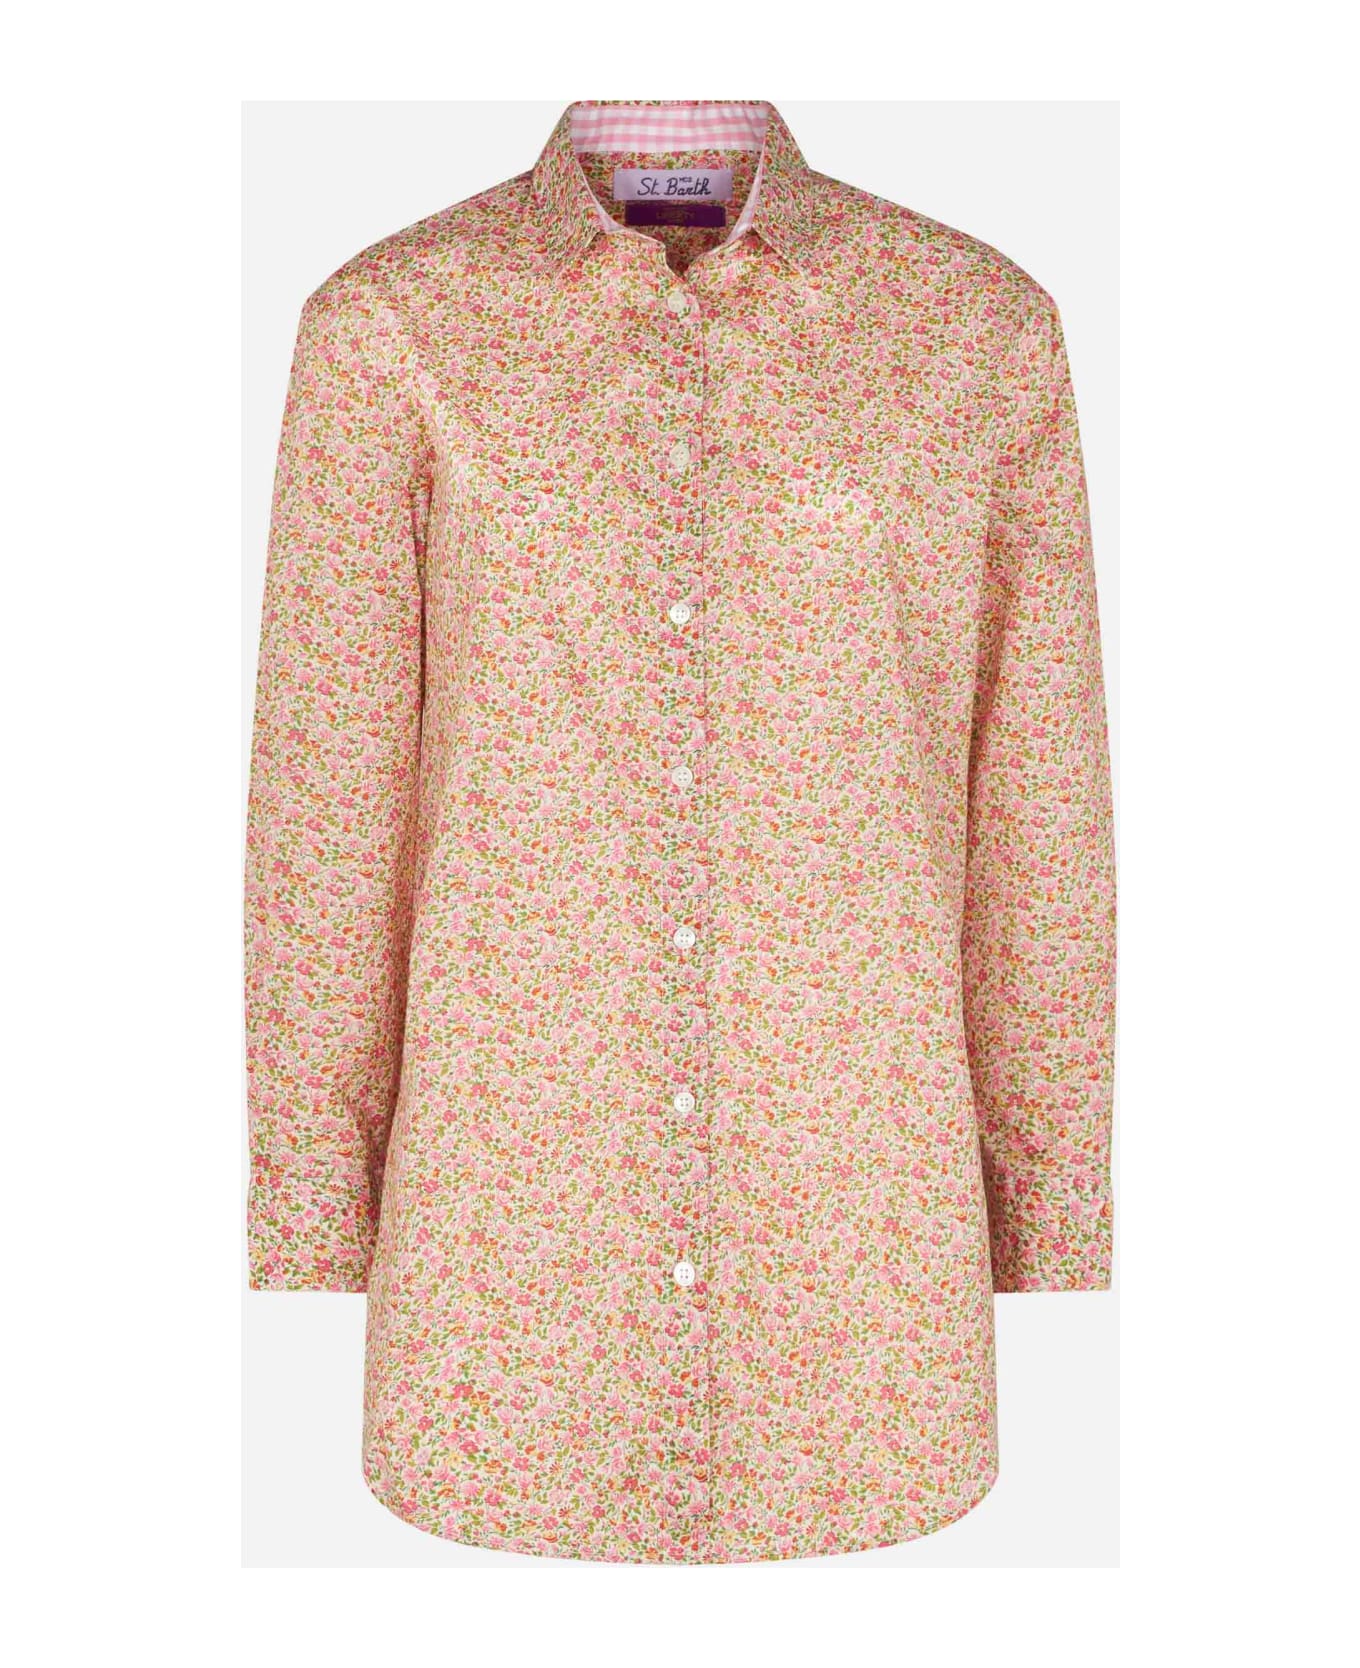 MC2 Saint Barth Woman Brigitte Cotton Shirt With Flower Print | Made With Liberty Fabric - MULTICOLOR